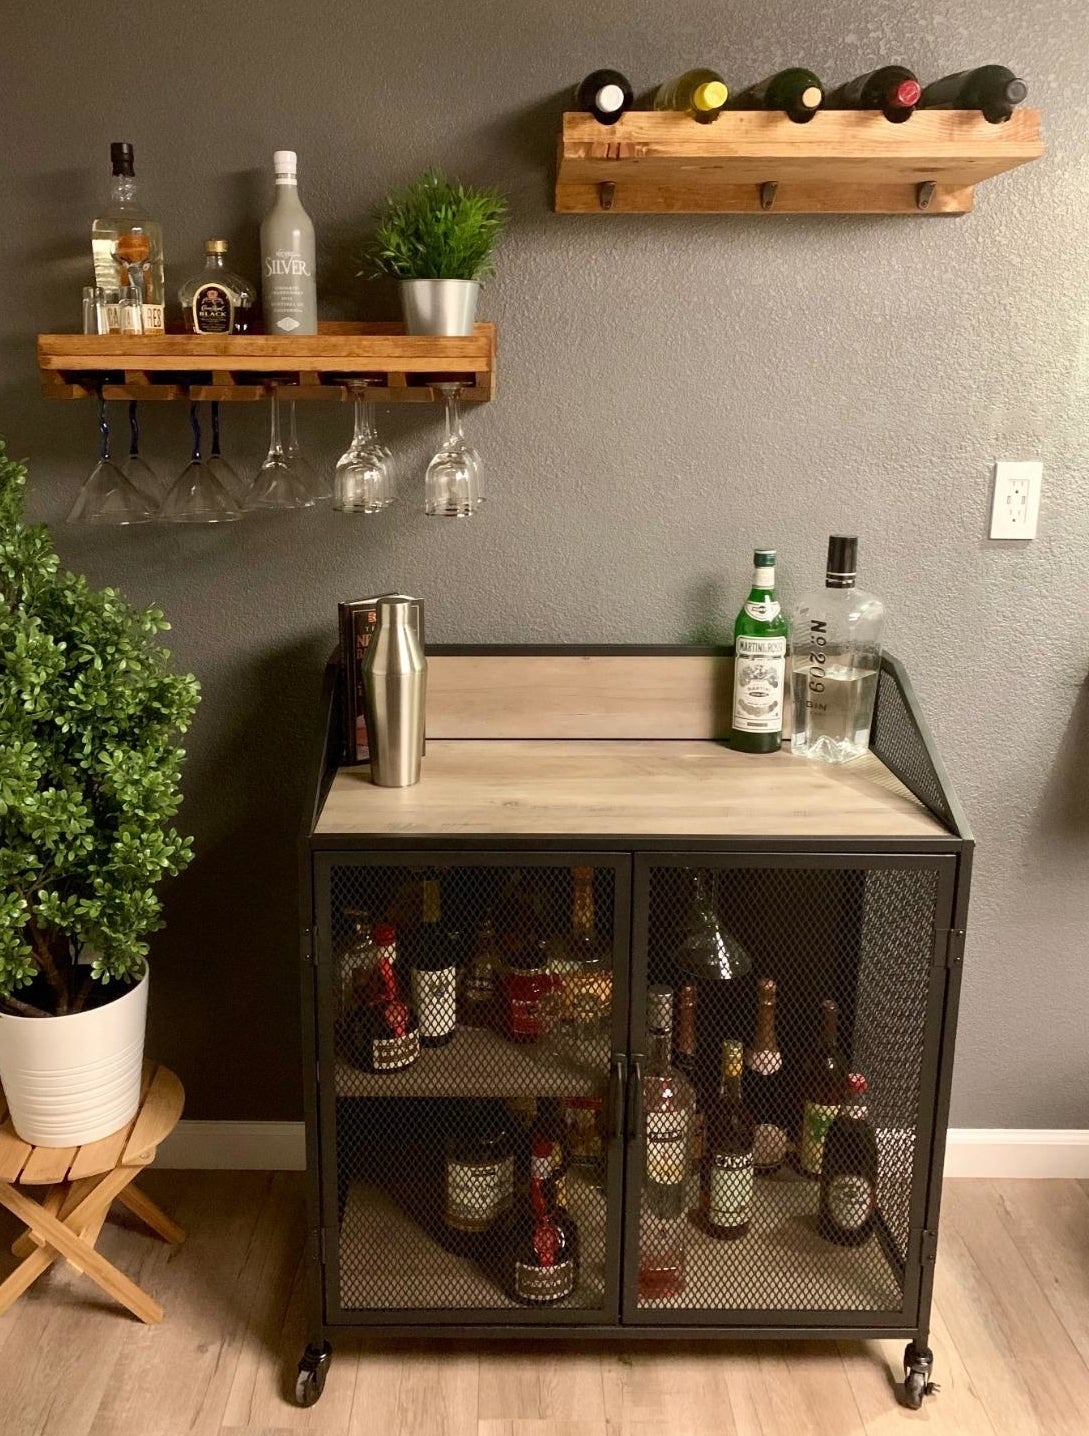 reviewer image of the Walker Edison Malcomb Urban Industrial Metal Mesh Double Door Rolling Bar Cabinet with several bottles of alochol in the cabinet space and a bottle of gin on its top surface